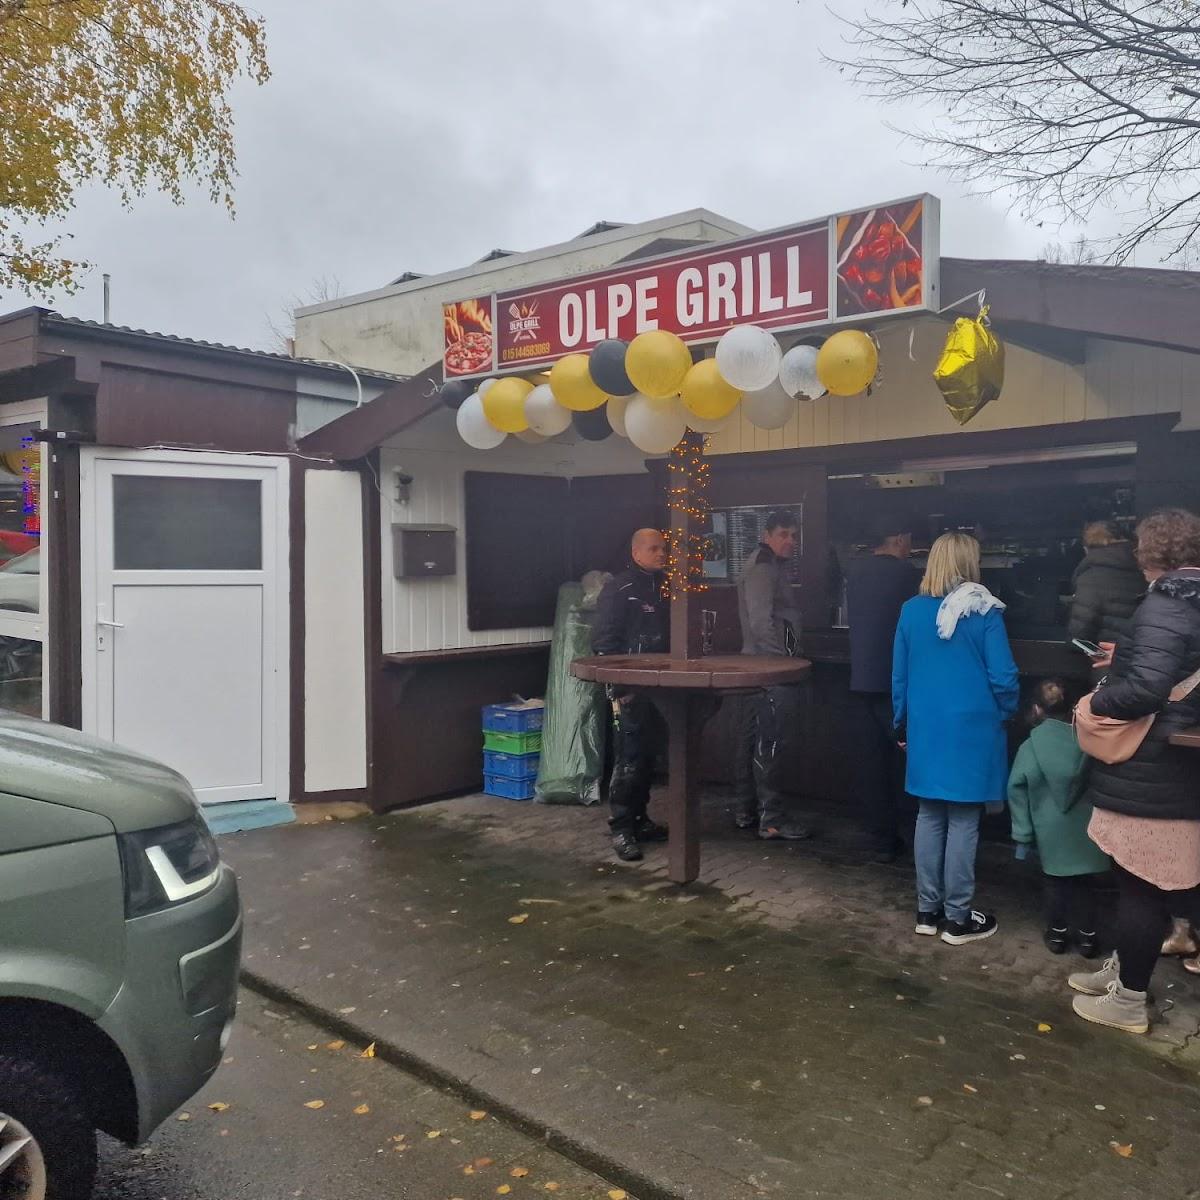 Restaurant "grill" in Olpe